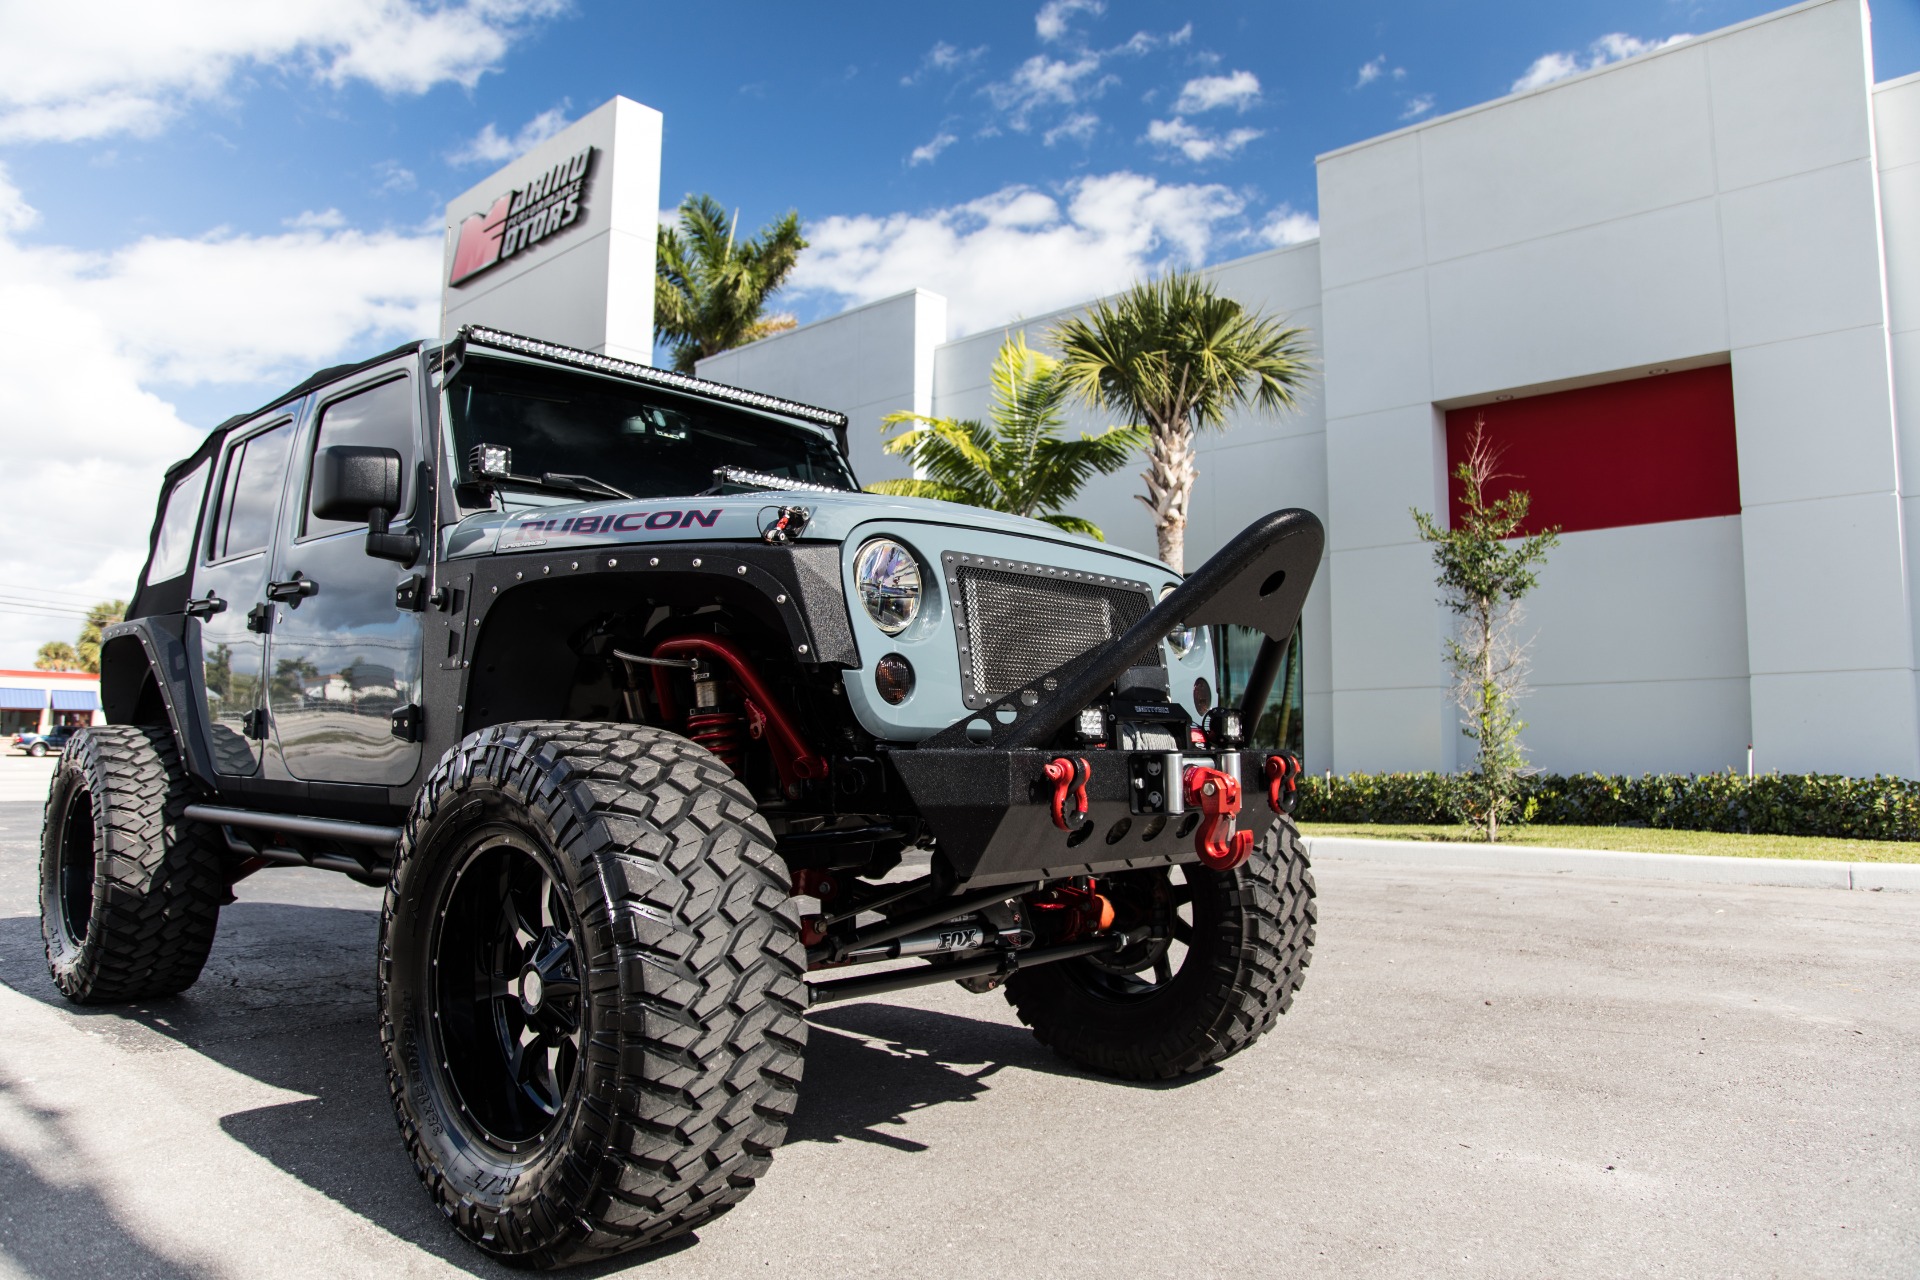 Used 2013 Jeep Wrangler Unlimited Rubicon 10th Anniversary For Sale  ($49,900) | Marino Performance Motors Stock #651130